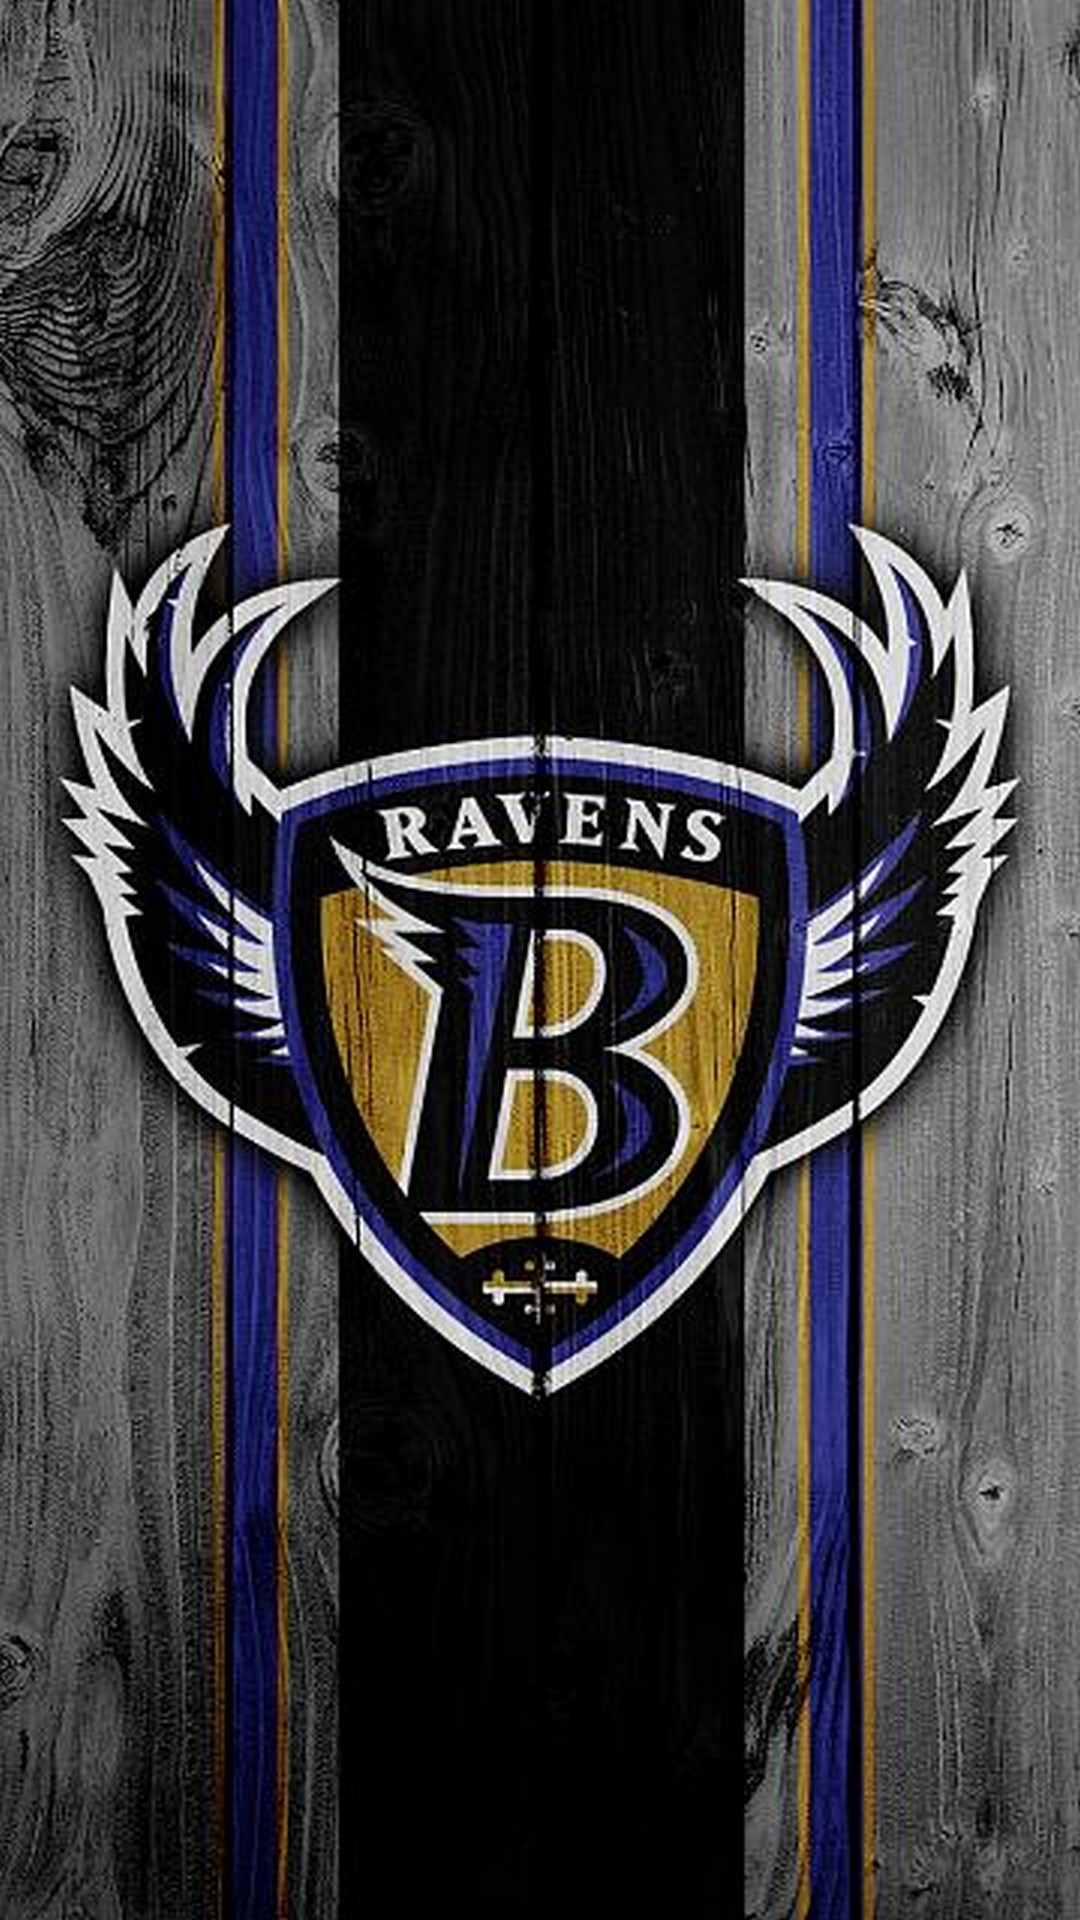 Baltimore Ravens iPhone Screen Lock Wallpaper With high-resolution 1080X1920 pixel. Download and set as wallpaper for Apple iPhone X, XS Max, XR, 8, 7, 6, SE, iPad, Android